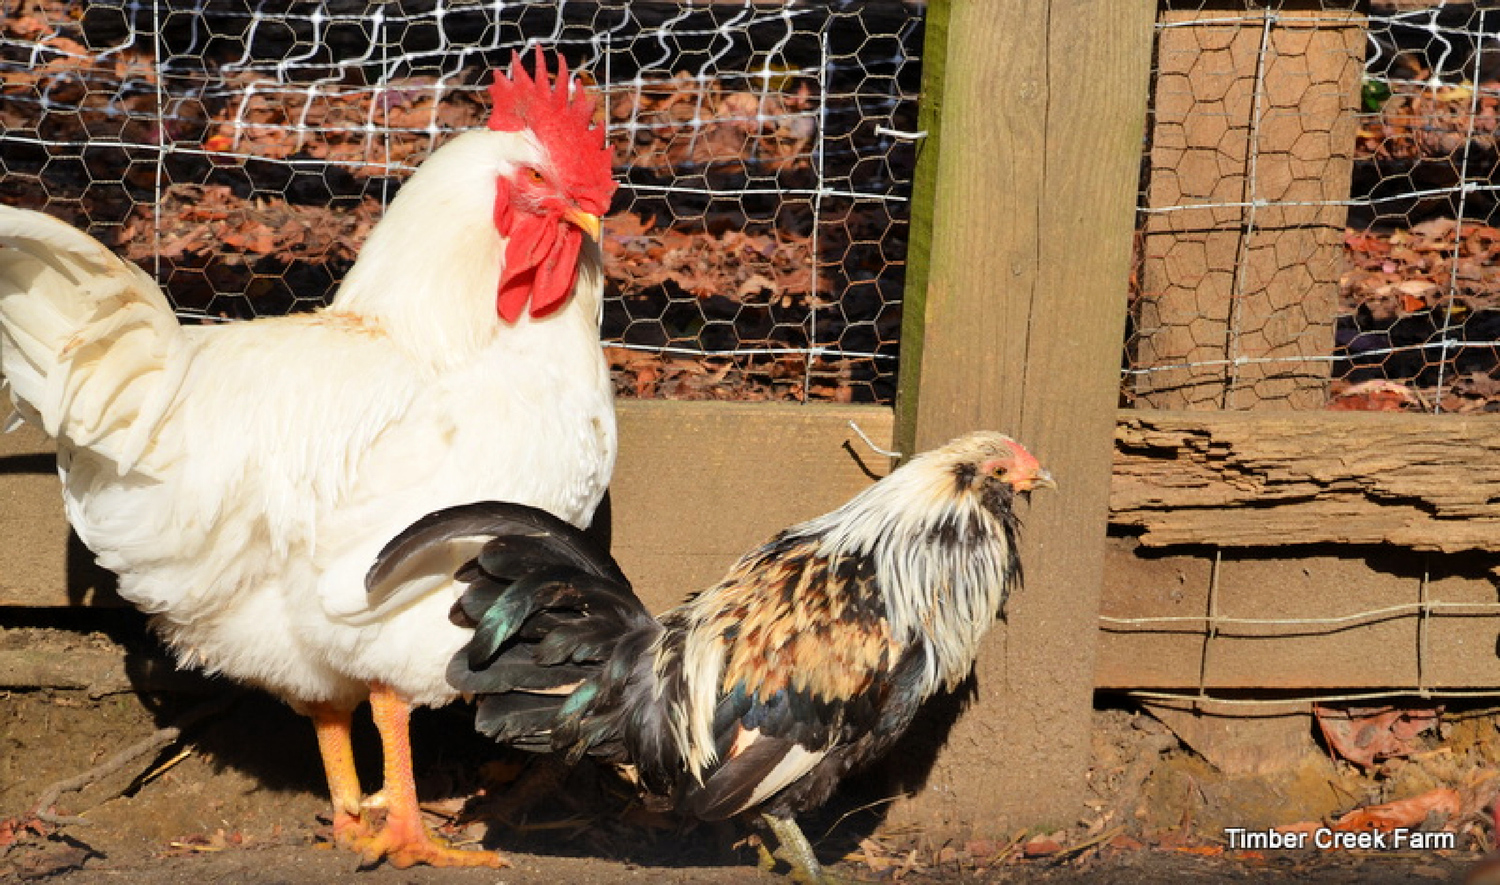 McMurray Hatchery | Keeping Bantam Chickens with Full-Size Chickens